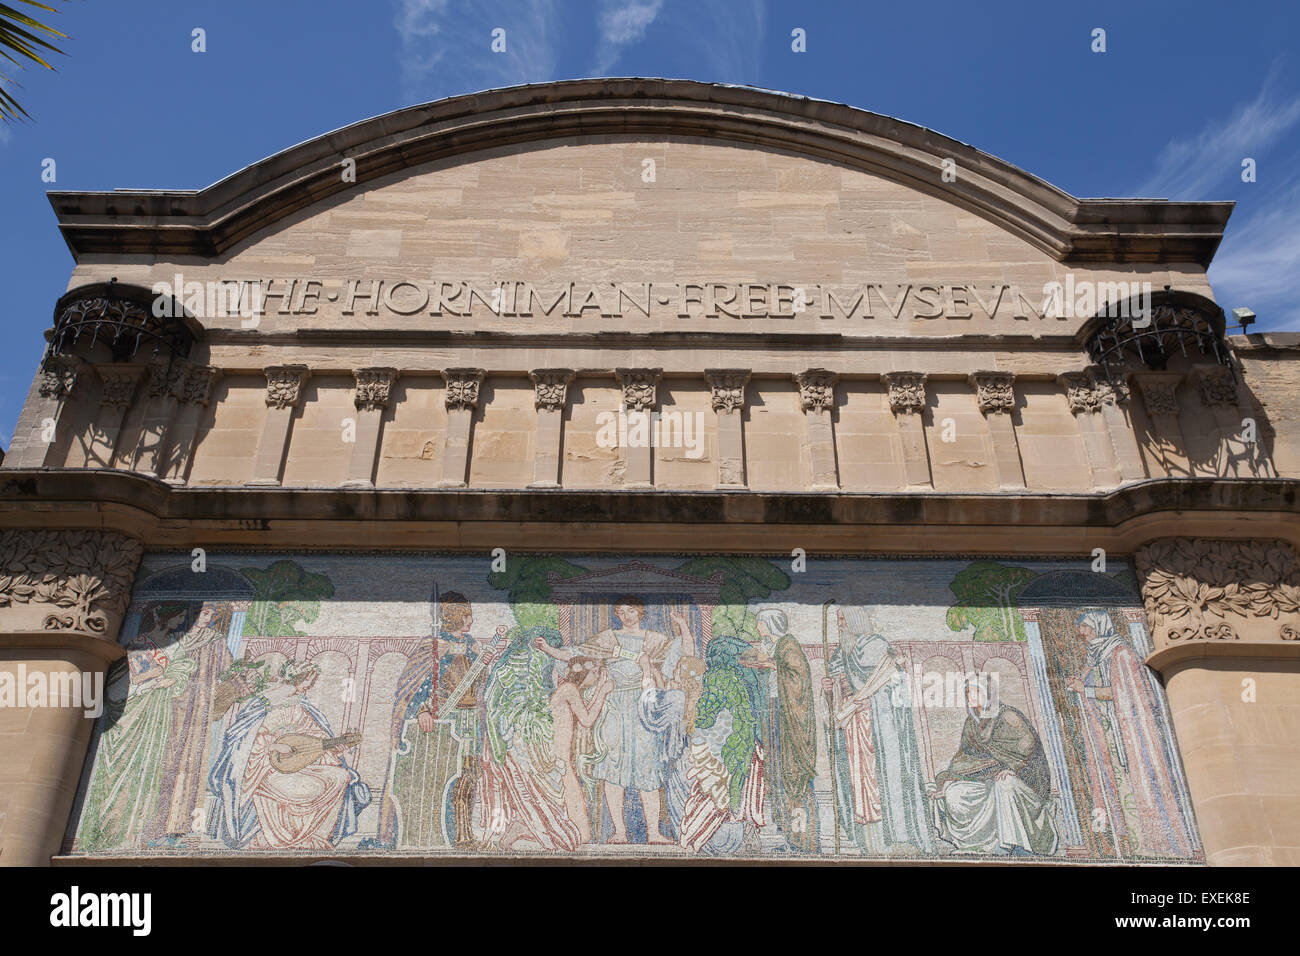 Neoclassical mosaic mural at the entrance of The Horniman Museum and Gardens, Forest Hill, Southeast London, England, UK Stock Photo